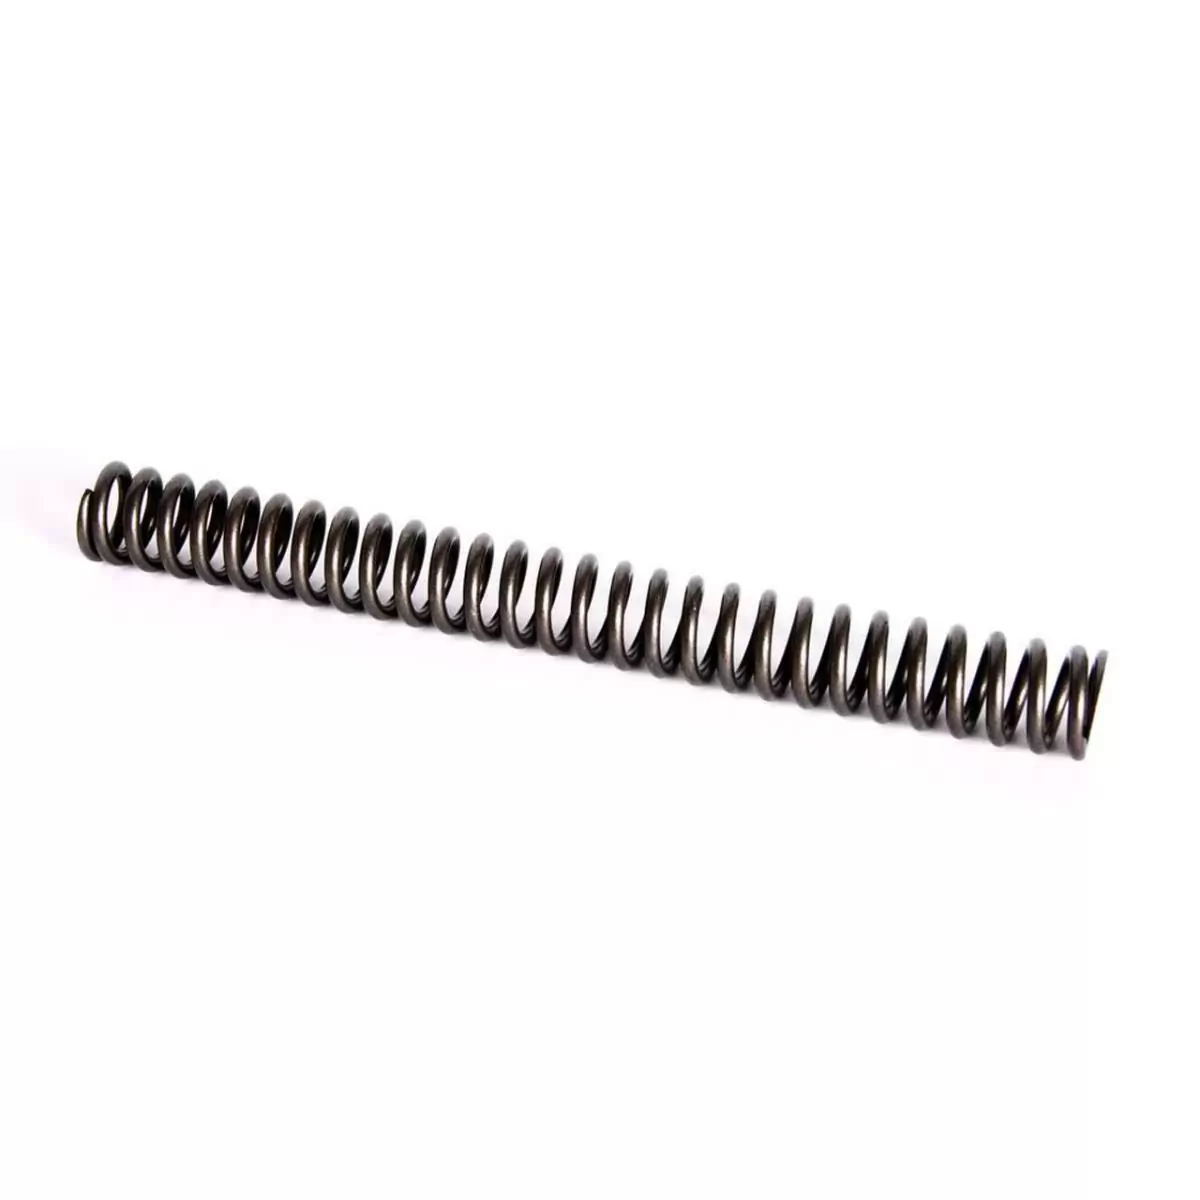 spare spiral spring hard 63mm for sf 14cr85-e25 - image